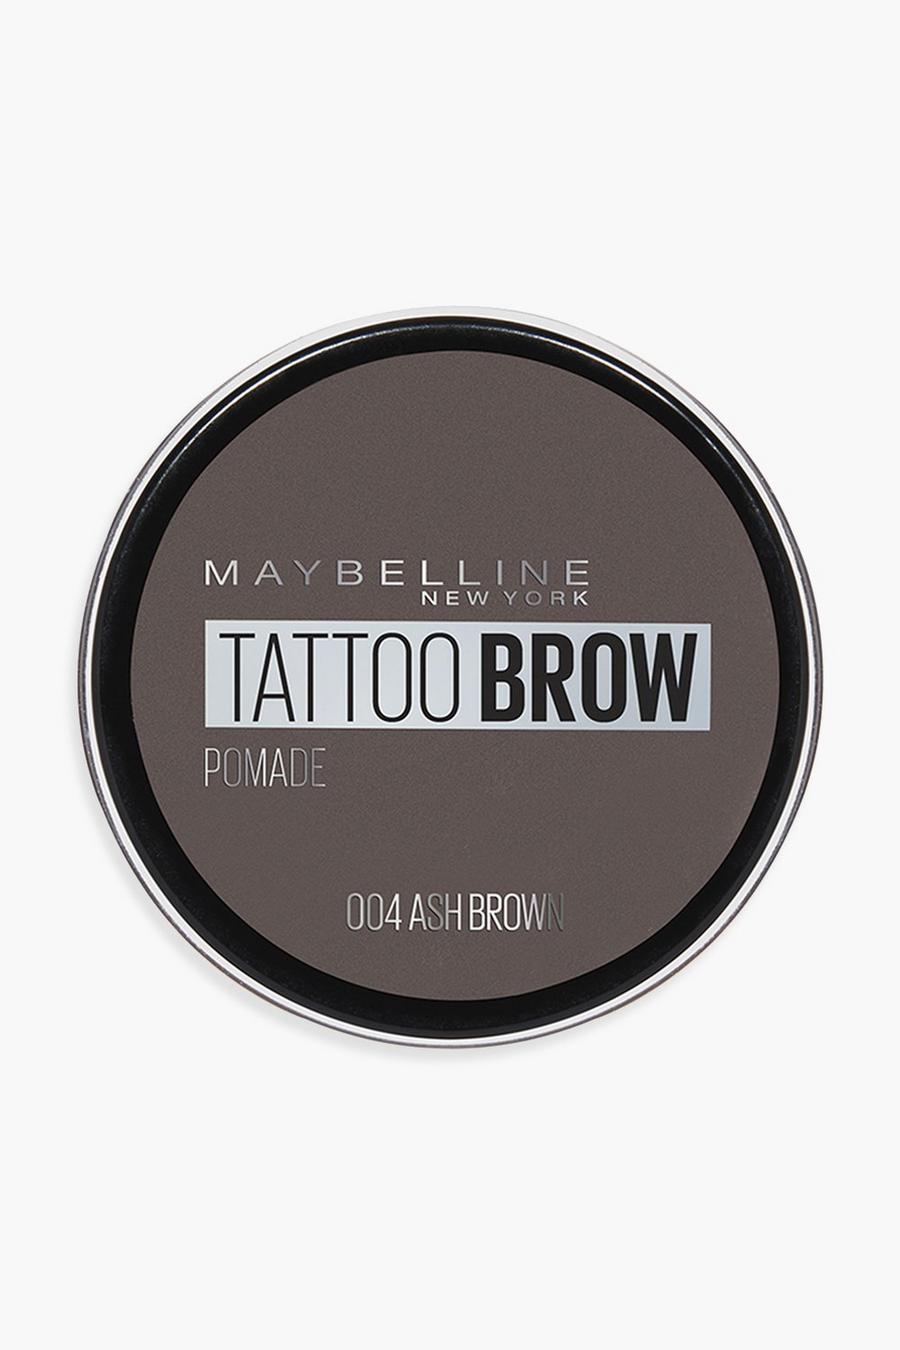 04 ash brown Maybelline Tattoo Brow Eyebrow Pomade image number 1